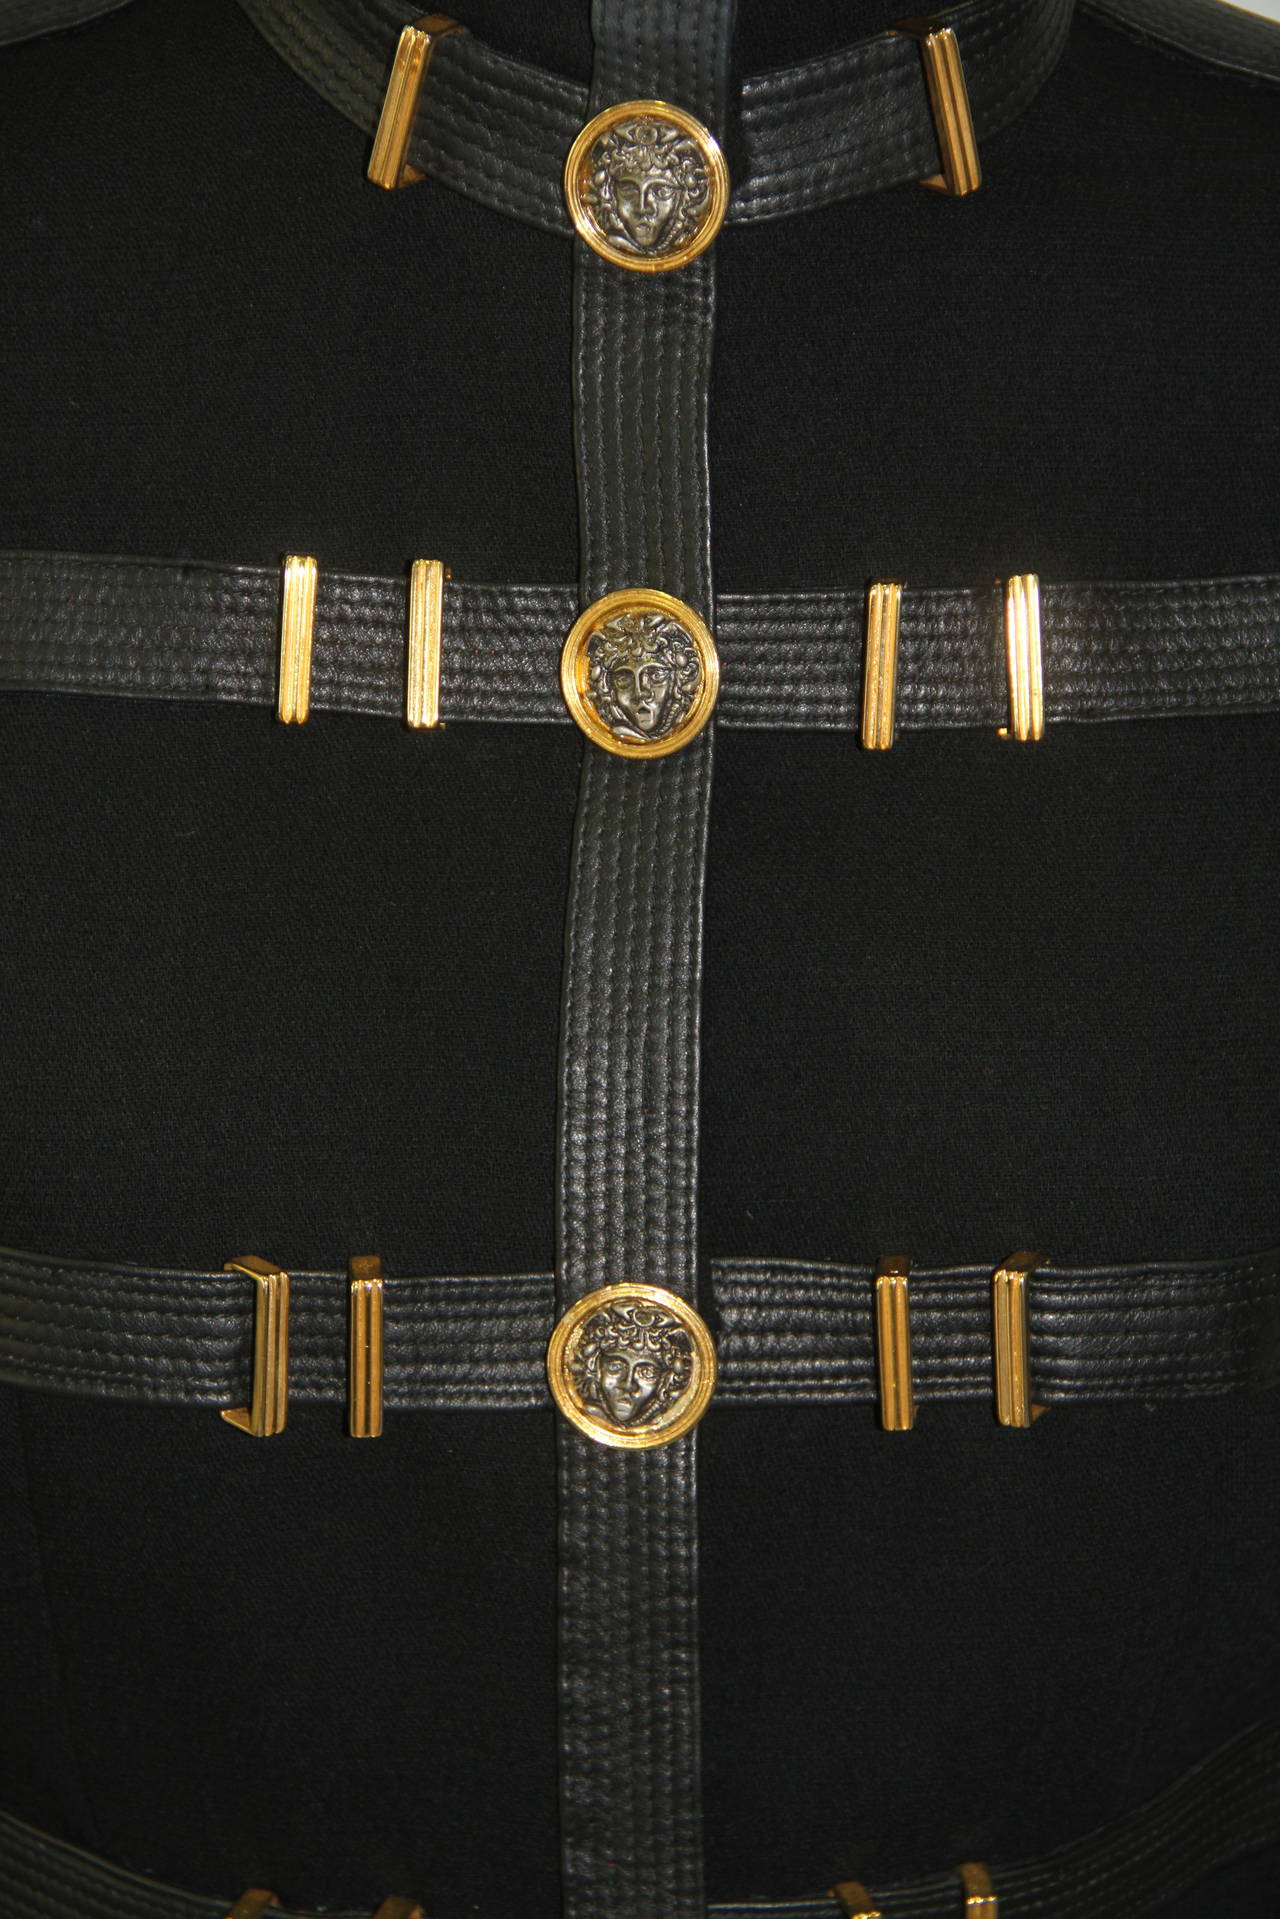 Museum quality Gianni Versace black wool suit from the Fall 1992 Bondage collection.

The suit features black leather bondage straps to the jacket and skirt, together with oversized gold-tone and silver tone Medusa embossed discs and buckles. The